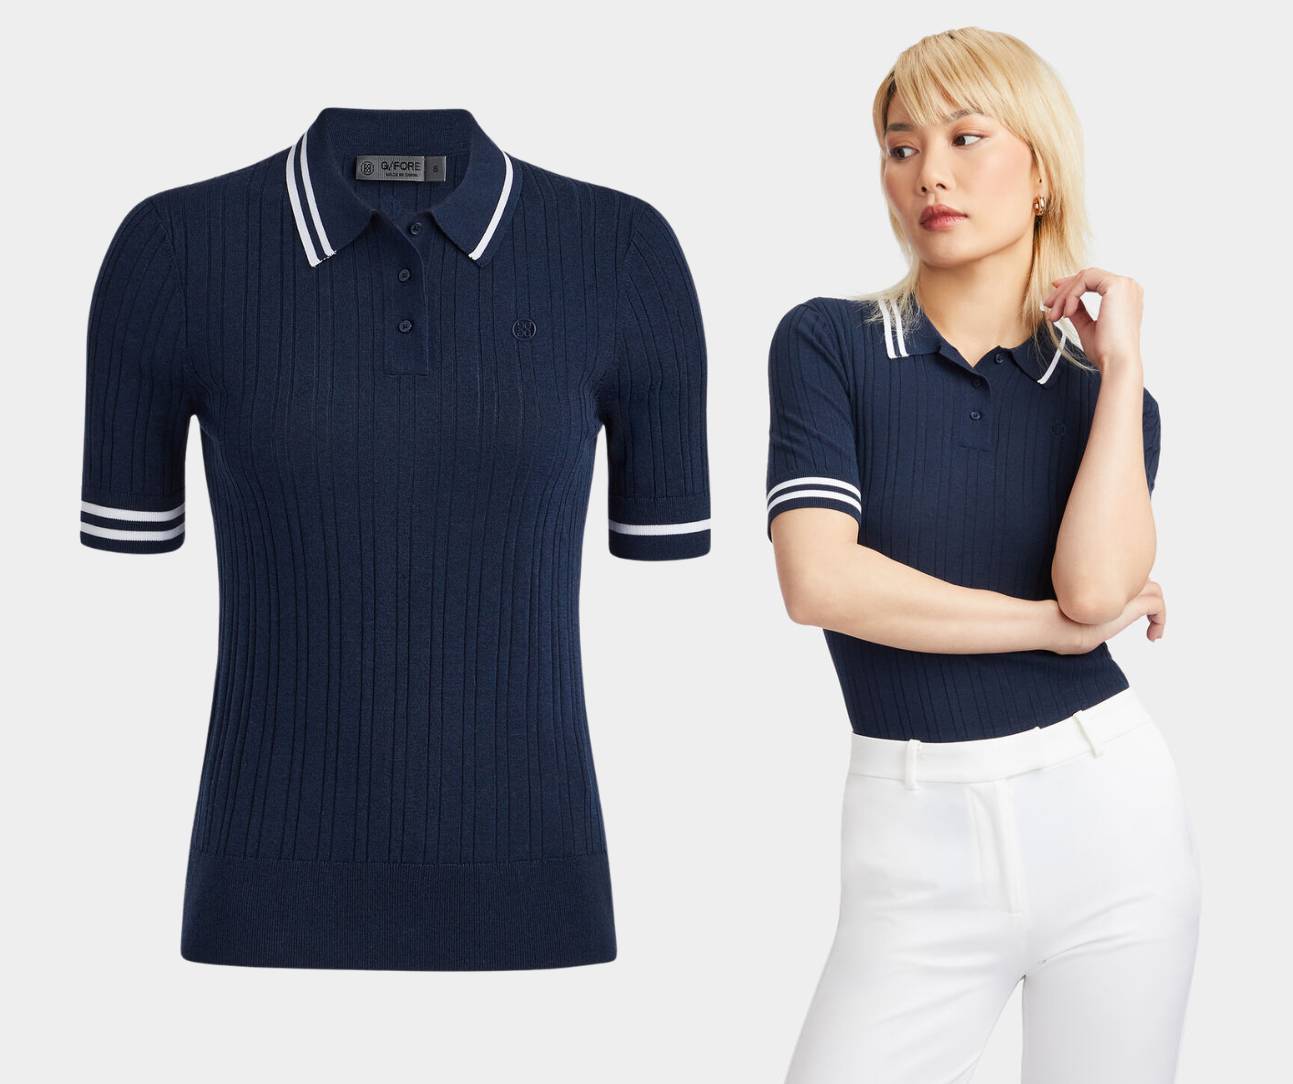 Women's winter golf fashion and accessories for your round